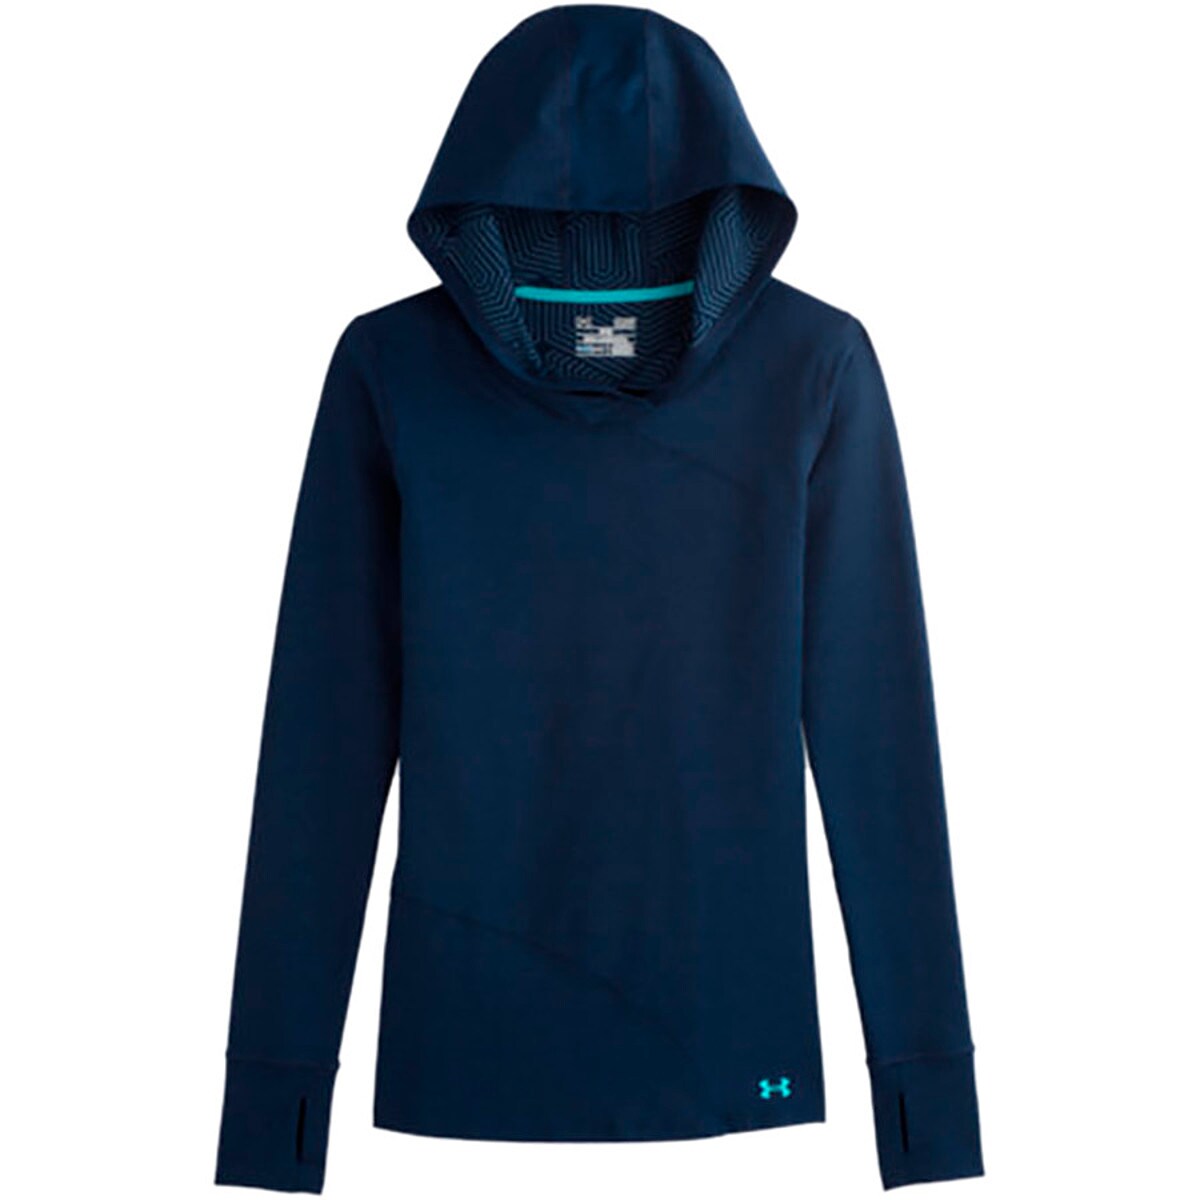 Under Armour Coldgear Infrared Evo Hoodie - Women's - Clothing